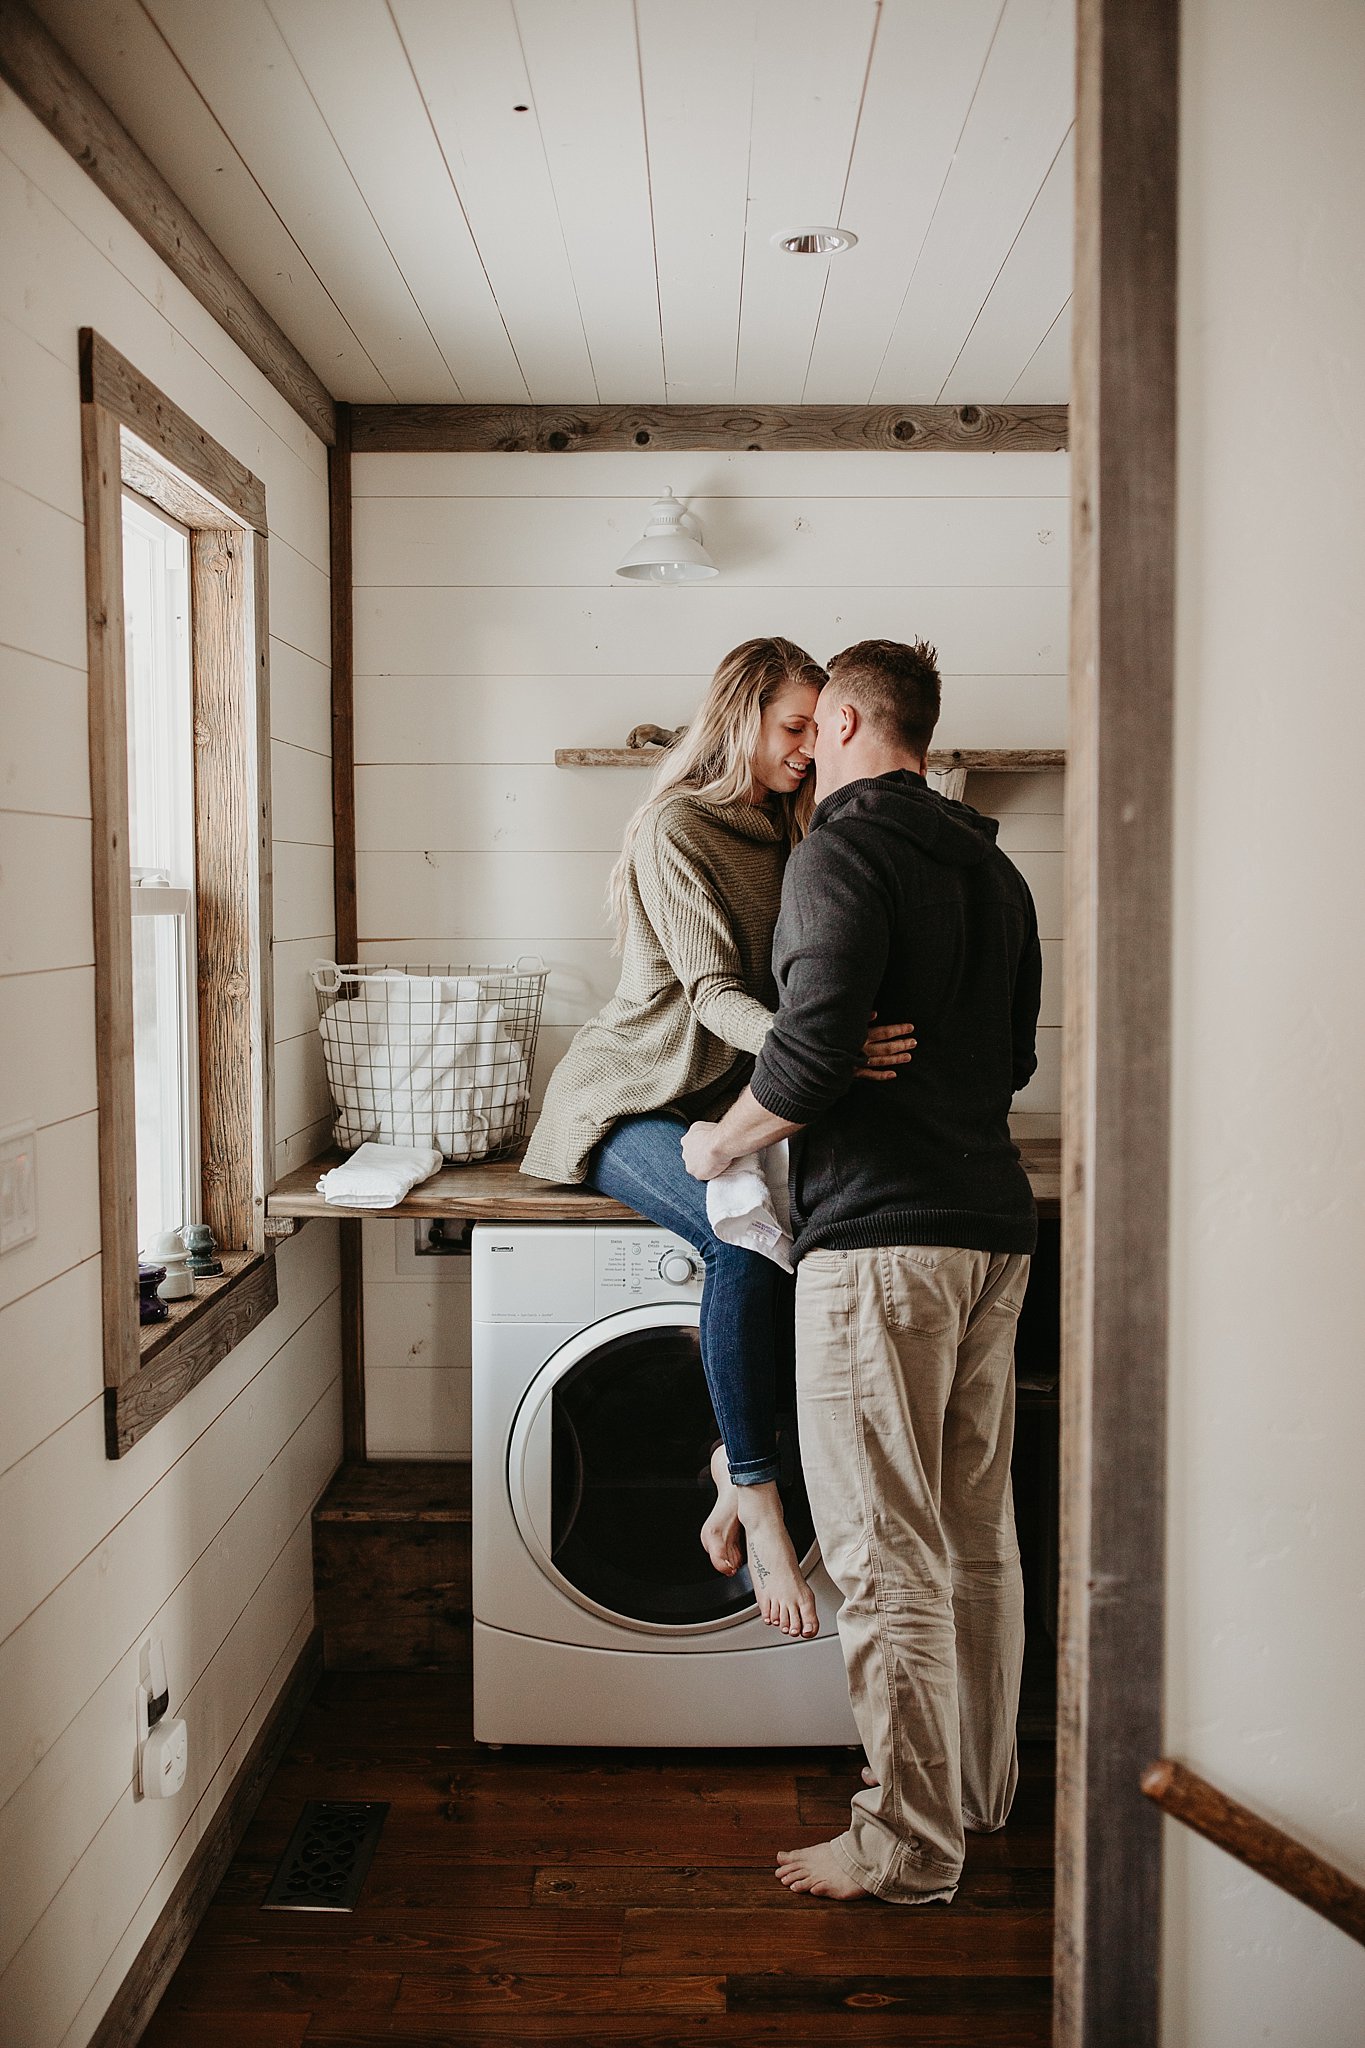 Couple romantic photos by washer machine